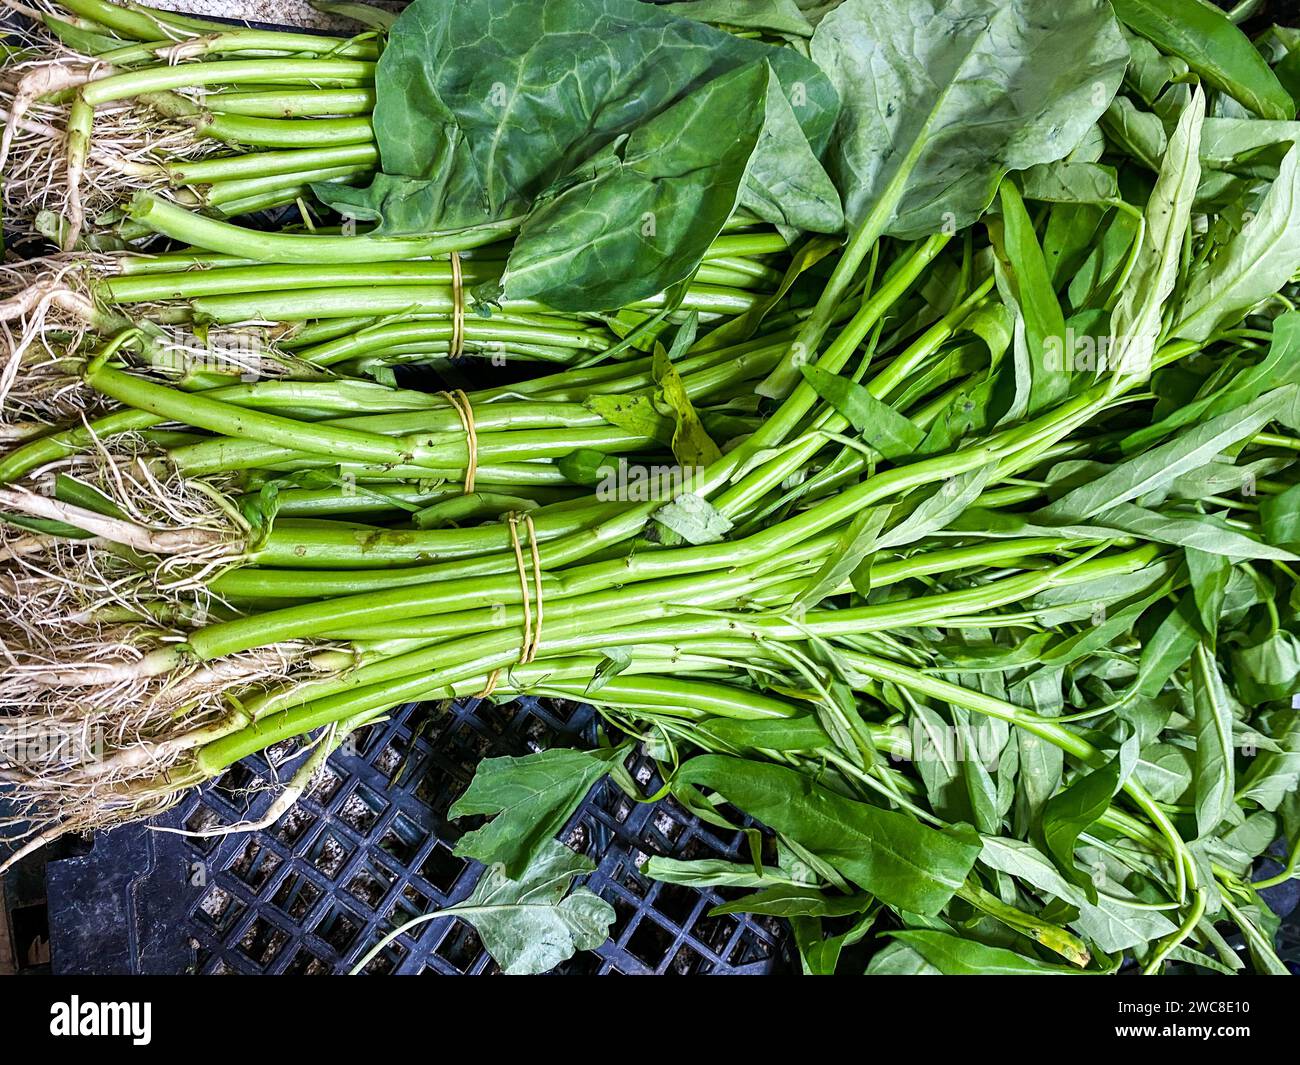 Pile of  Water Spinach  background. Selling at Fresh Market. Stock Photo